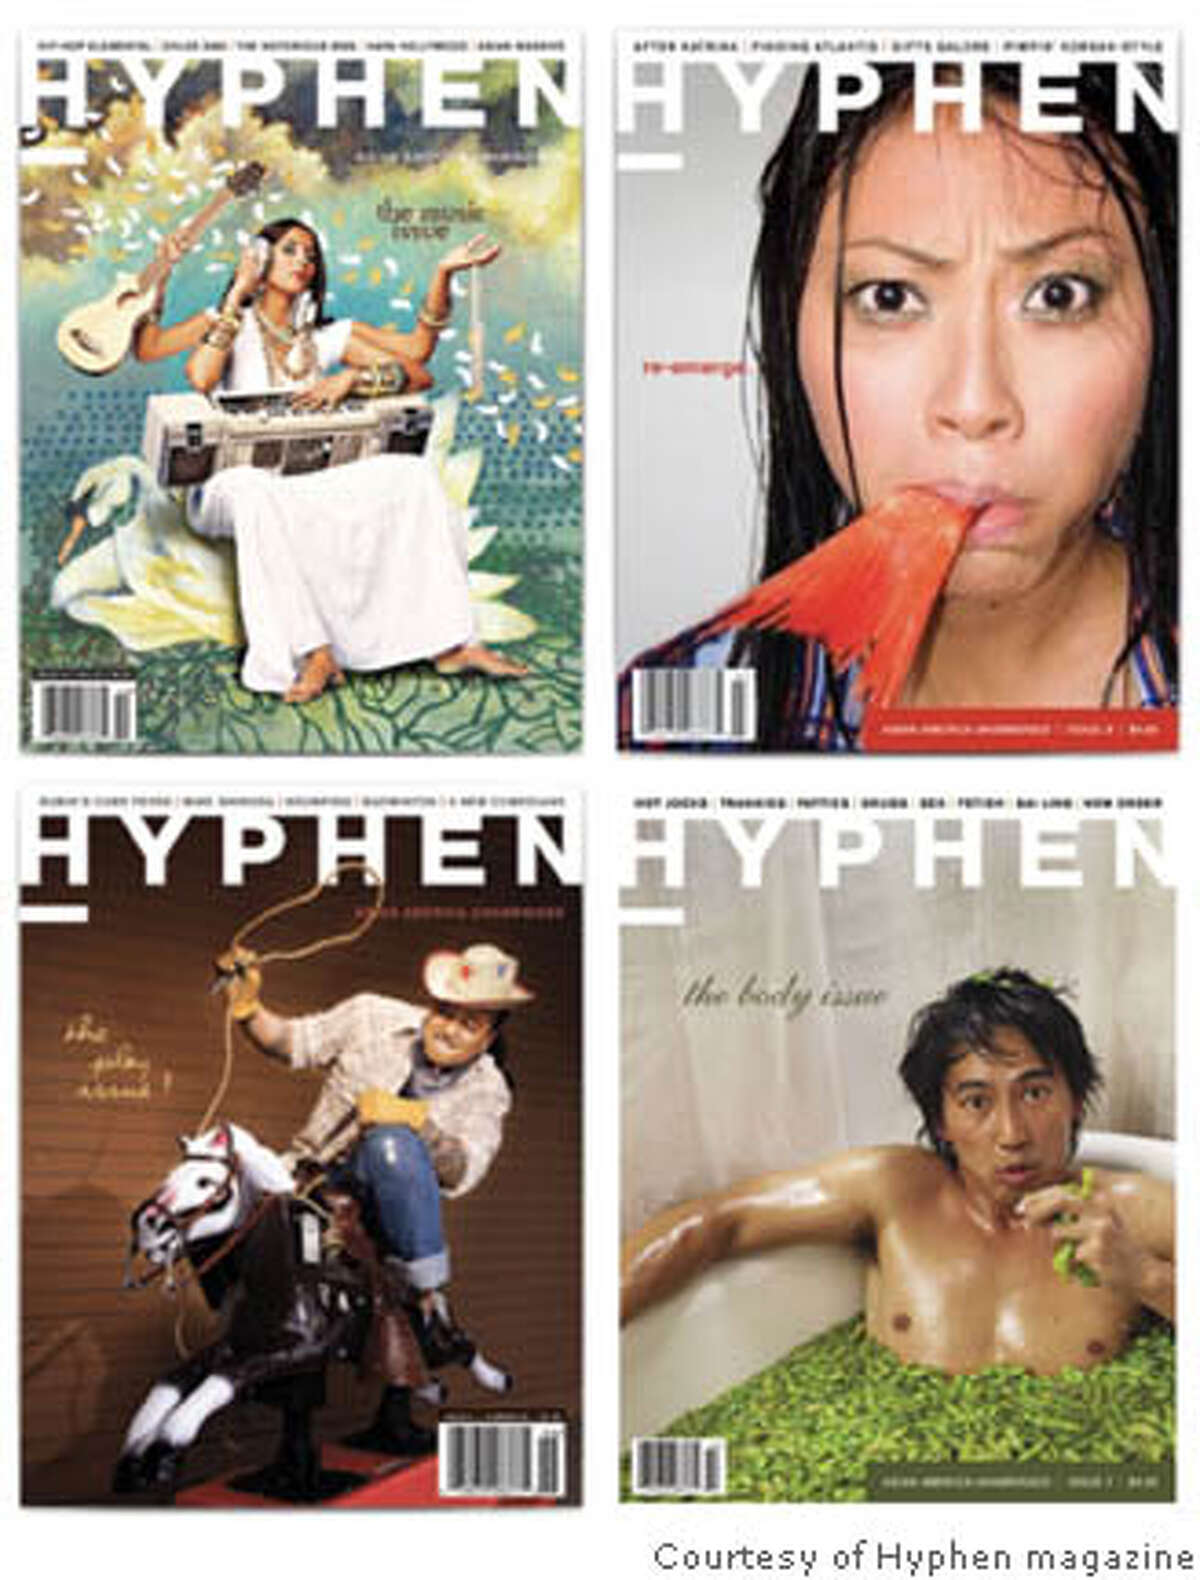 Judge a Book: Hyphen's covers tell you pretty much what to expect within -- witty, subversive, offbeat reflections on Asian America. I'll buy that. Photo courtesy of Hyphen magazine